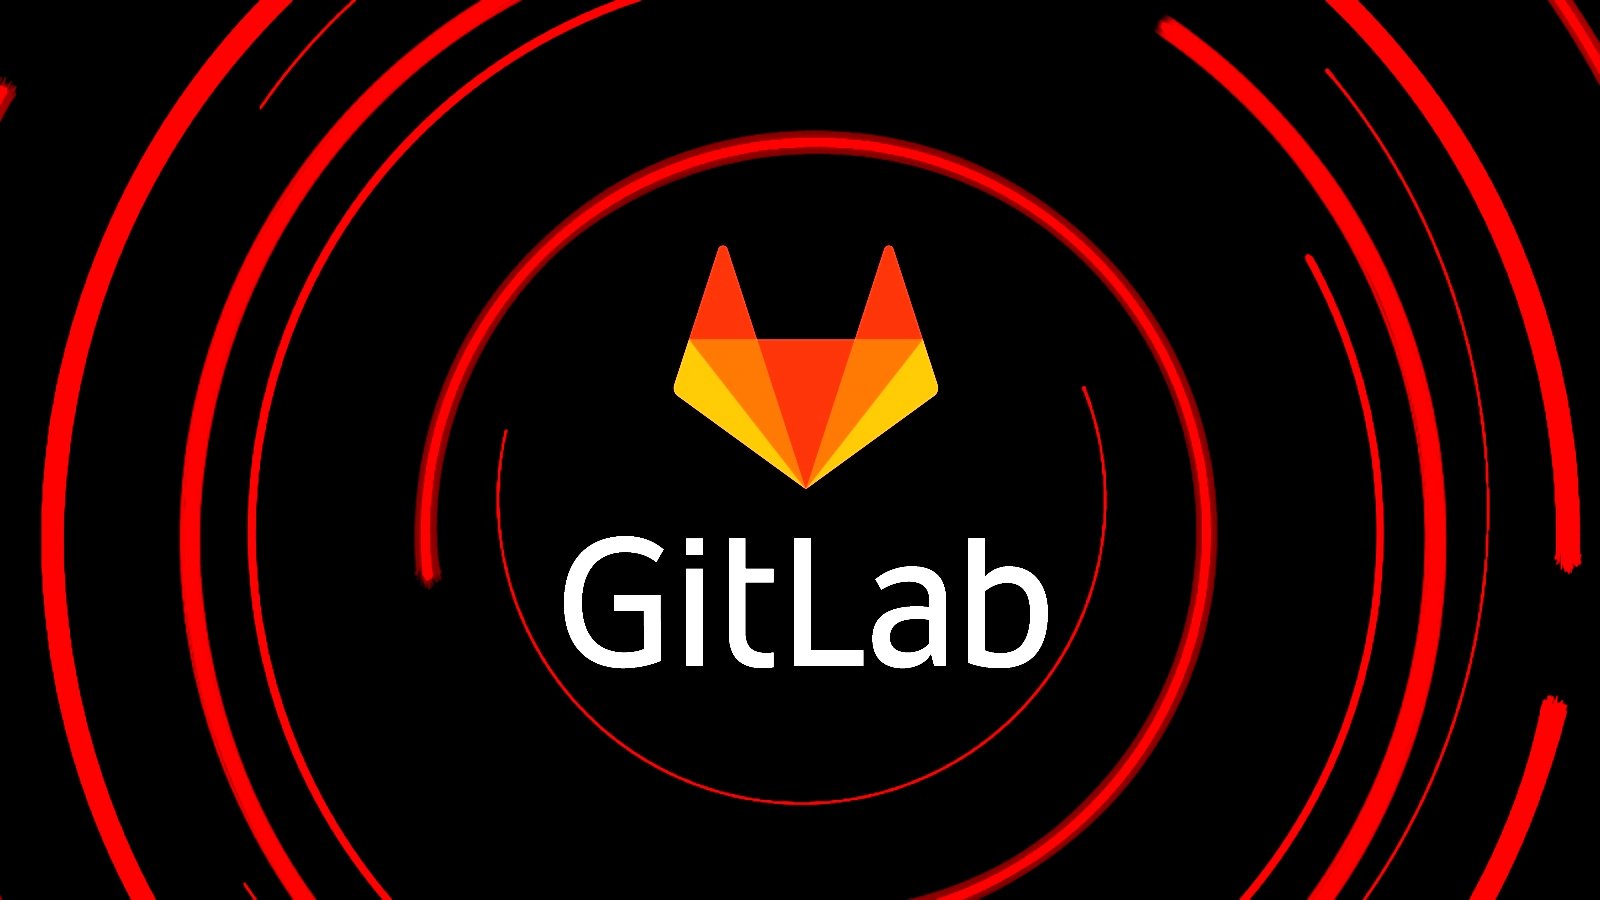 GitLab urges users to install security updates for critical pipeline flaw – Source: www.bleepingcomputer.com